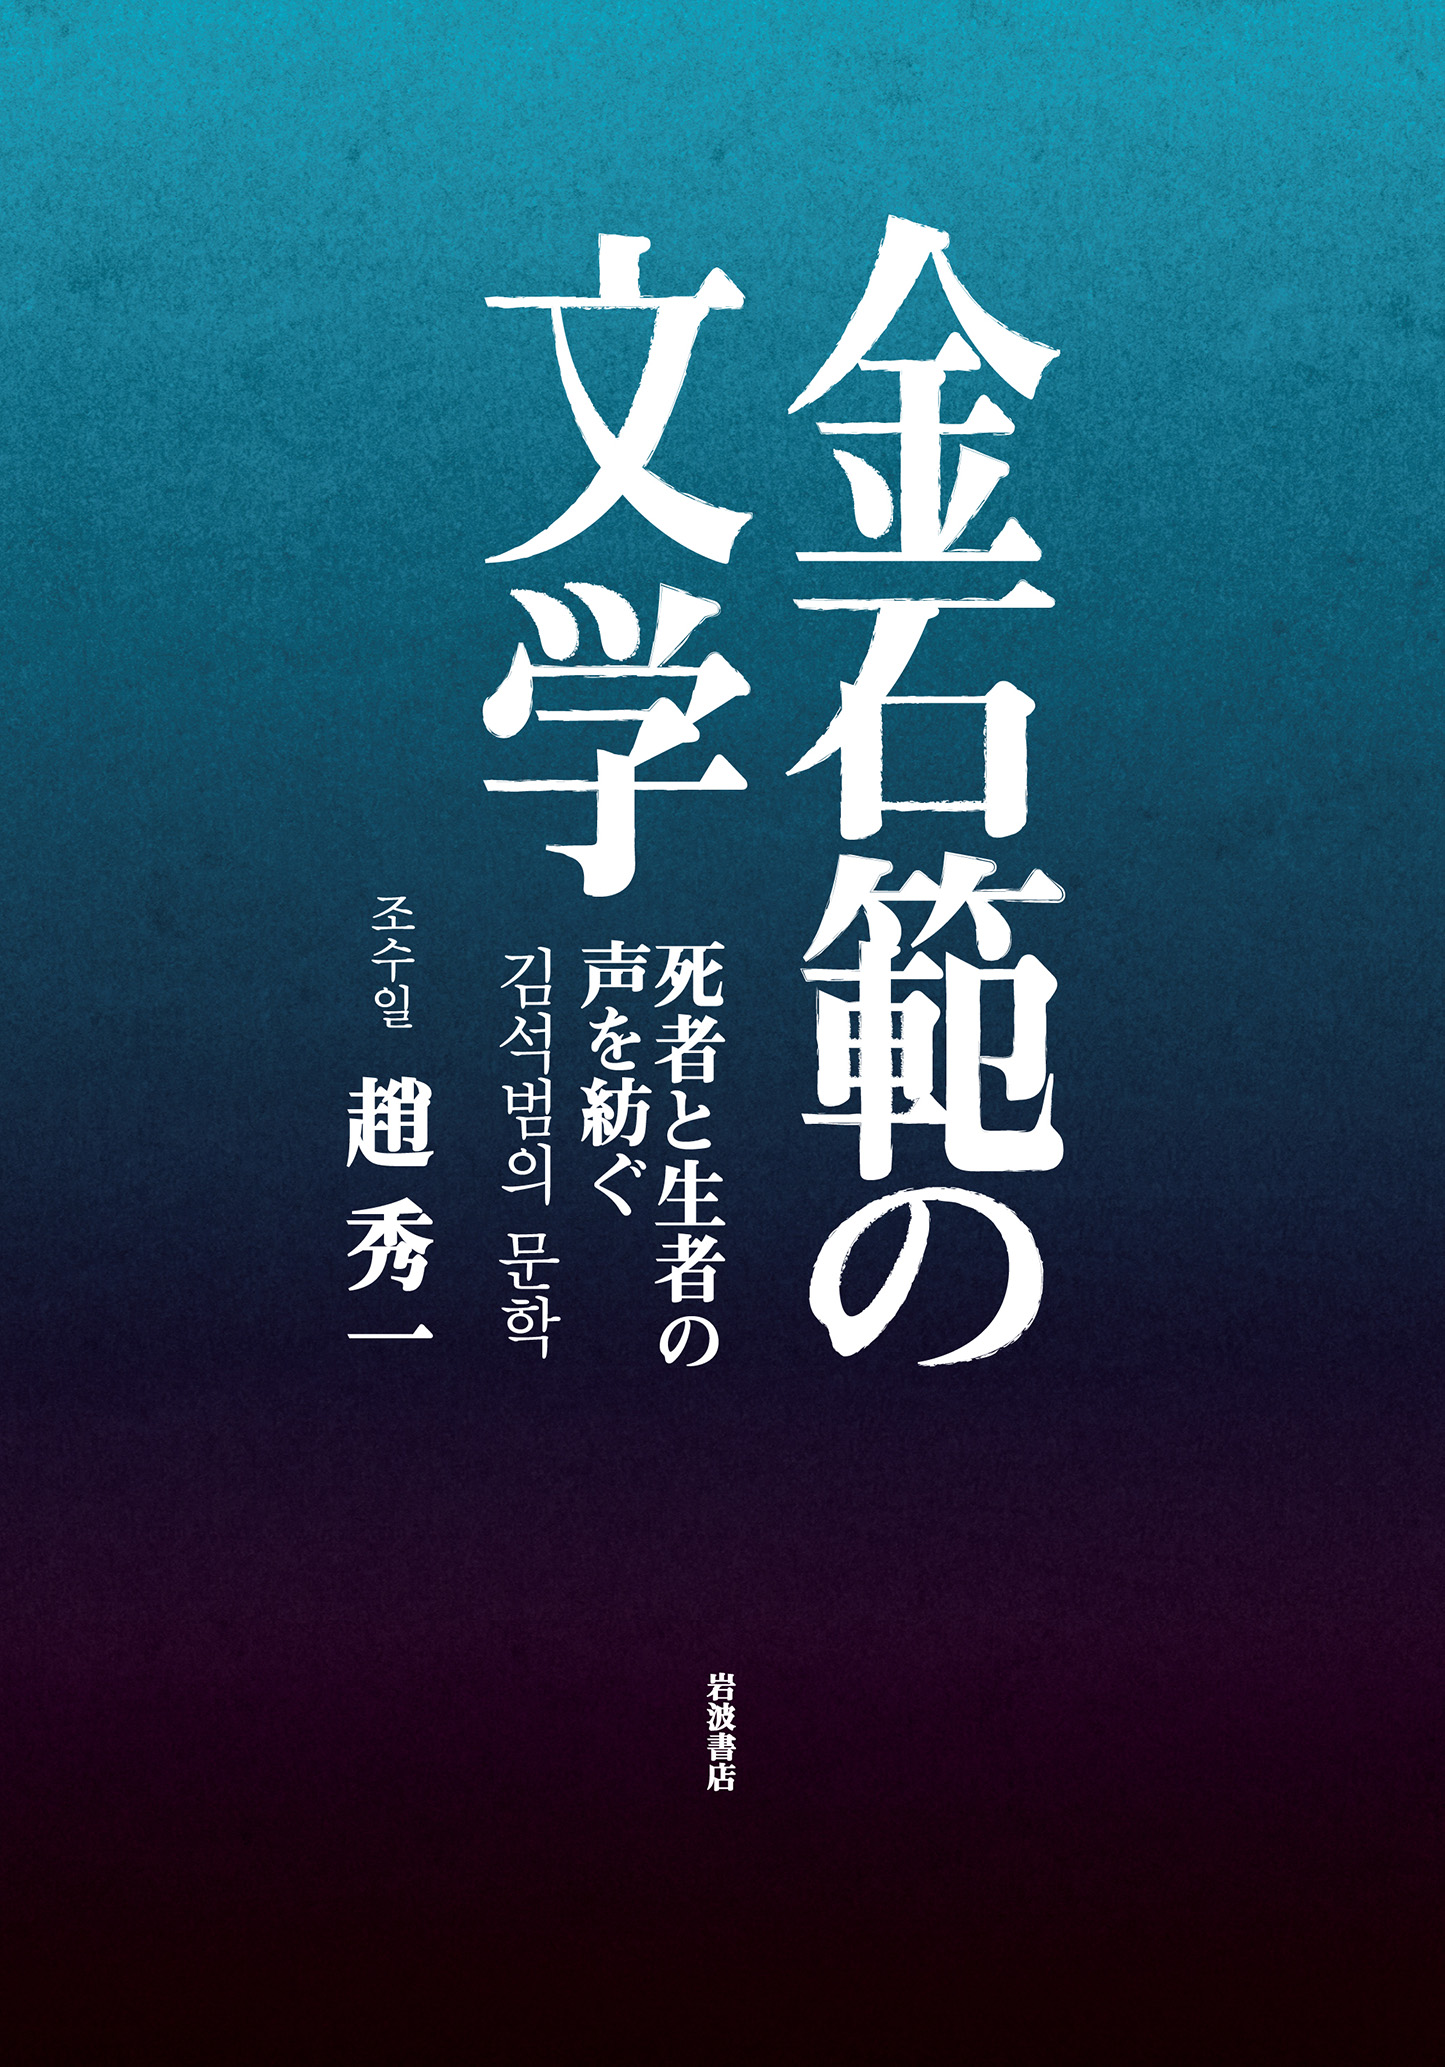 Typography of titles in Japanese and Korean on blue and black gradation background